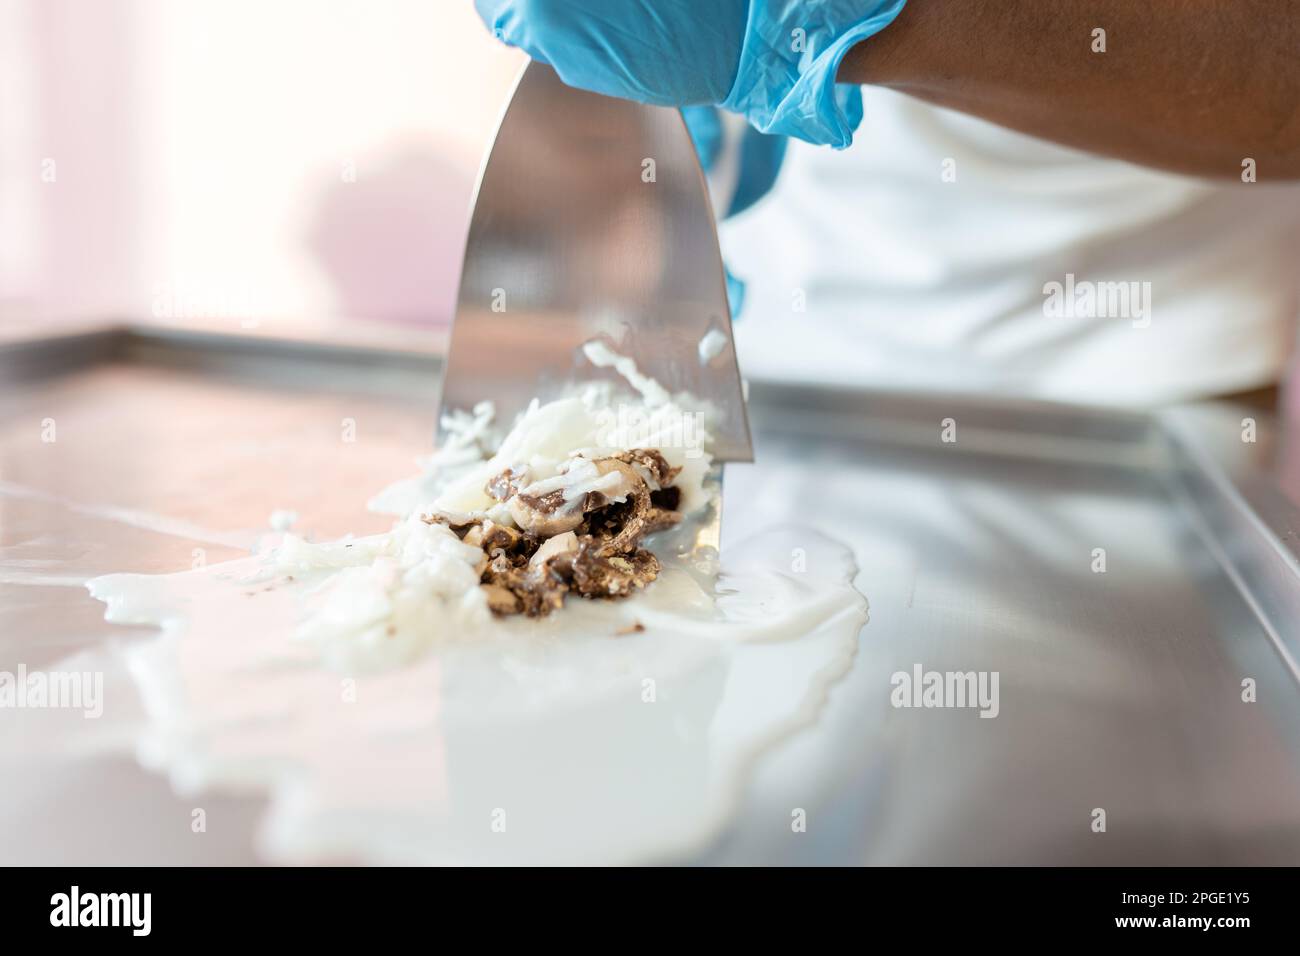 https://c8.alamy.com/comp/2PGE1Y5/a-worker-is-using-spatulas-to-mix-chocolate-striped-coconut-and-milk-on-a-rolled-ice-cream-machine-2PGE1Y5.jpg